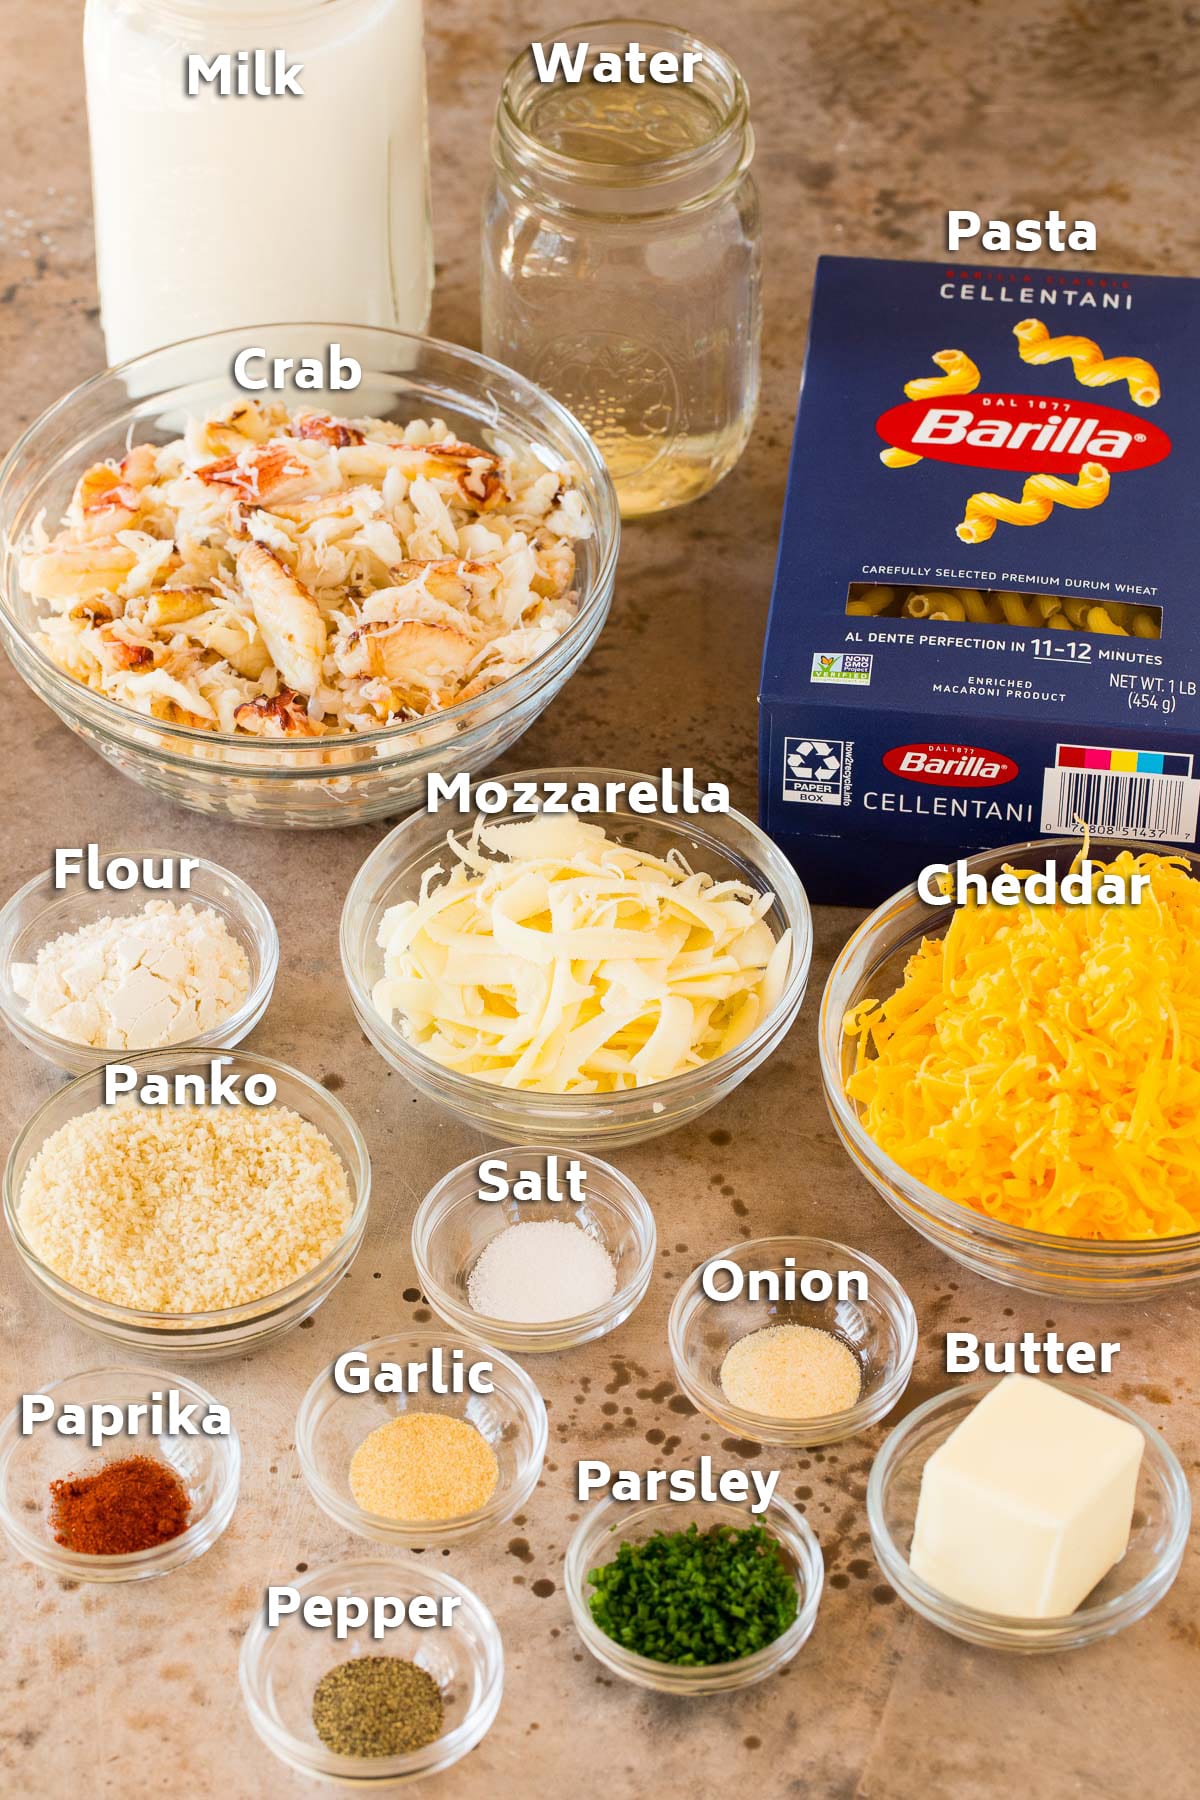 Ingredients including pasta, cheese, crab, milk and spices.